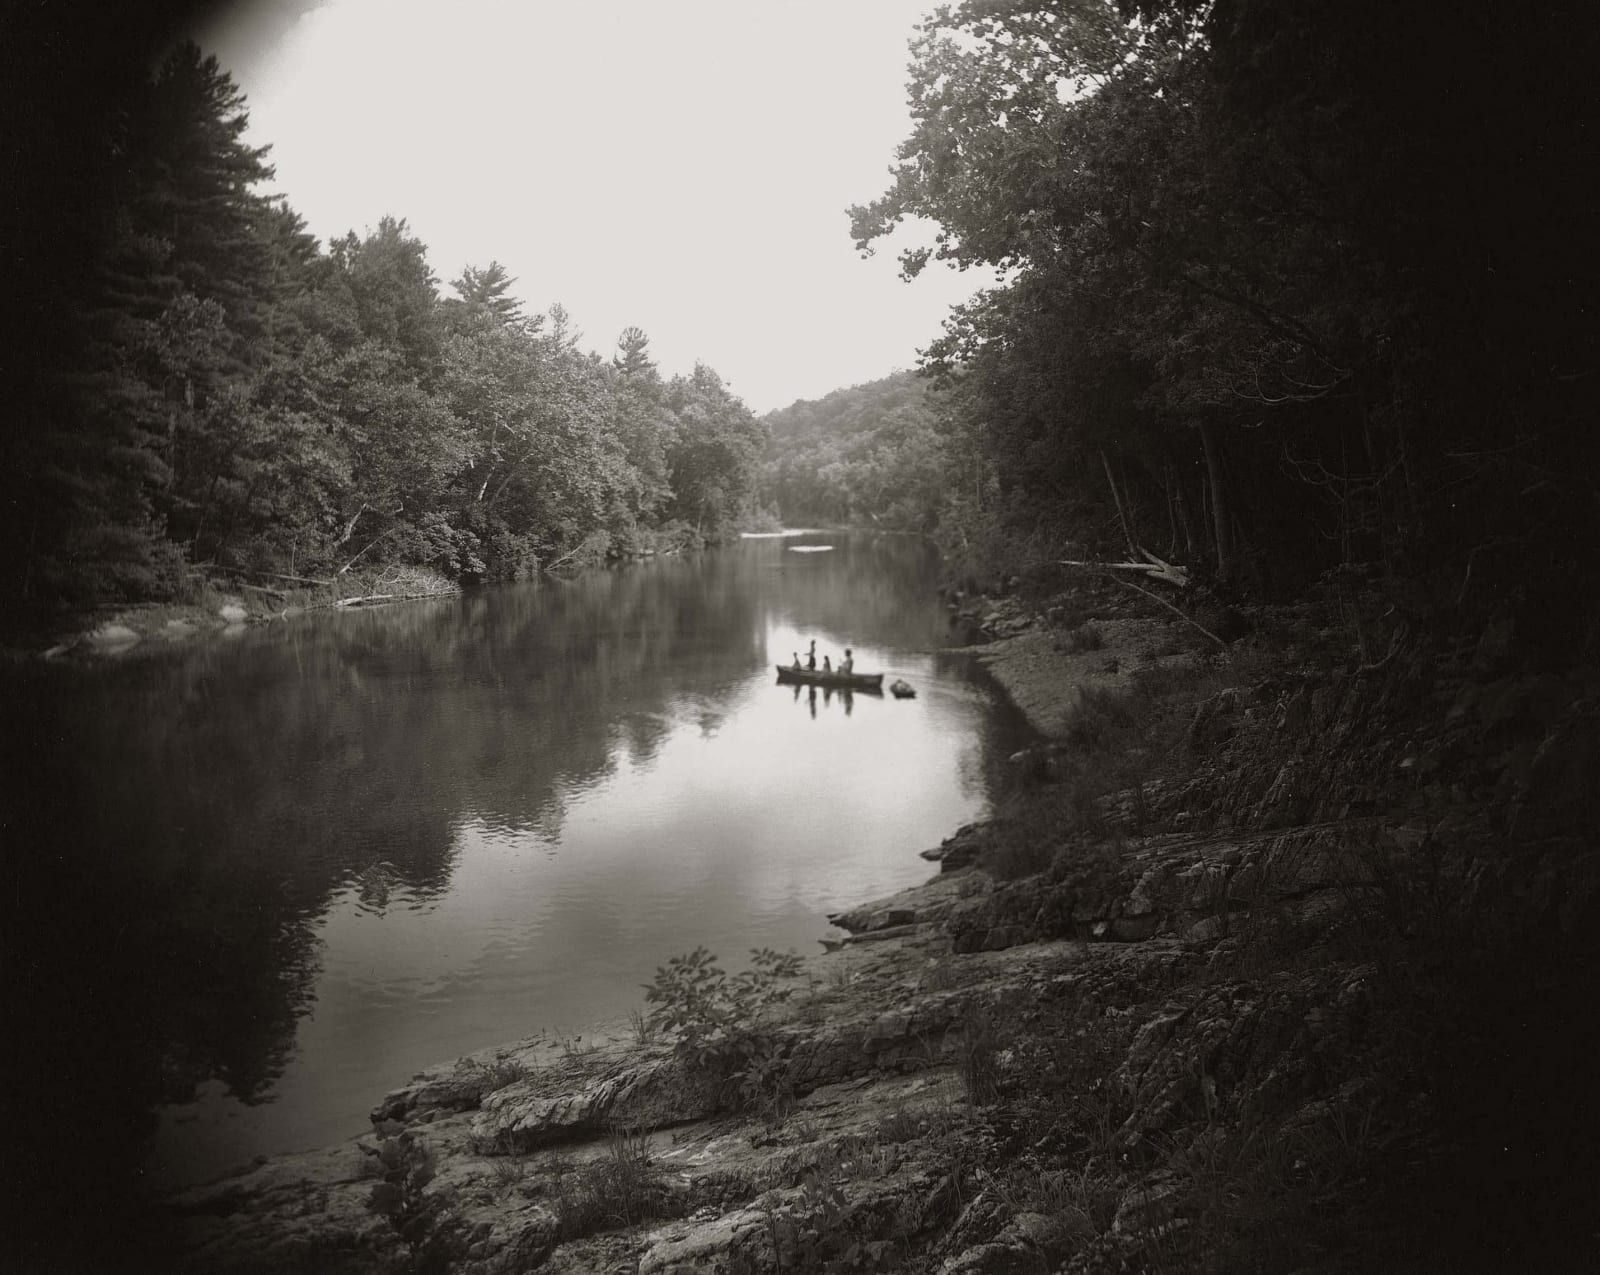 Emmett, Jessie and Virginia in a canoe crossing the Maury River, from the Immediate Family series by Sally Mann